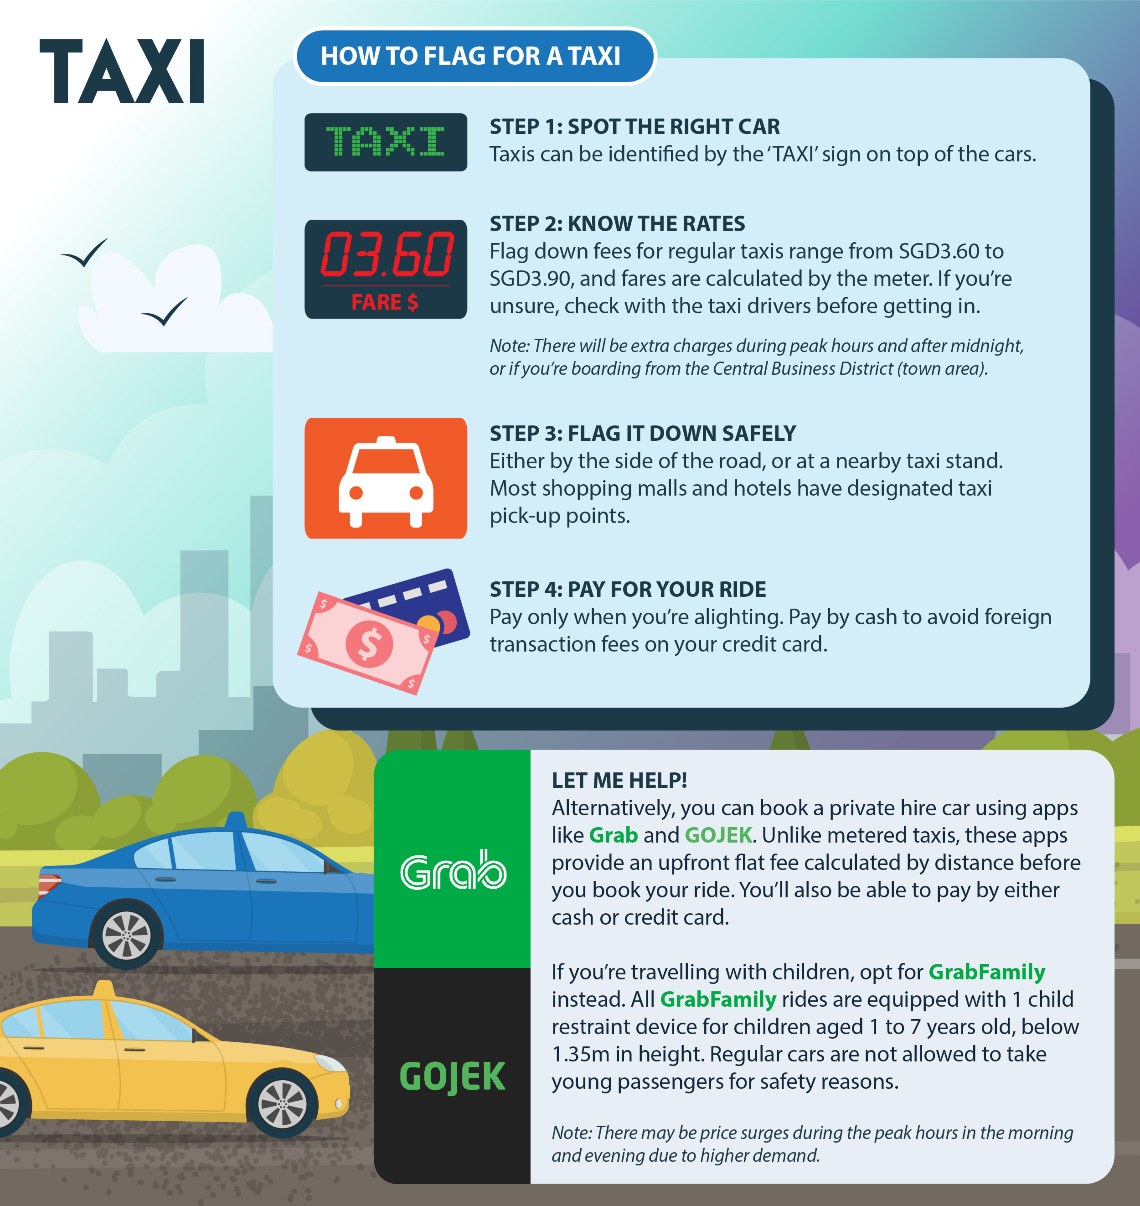 Getting around Singapore on taxis